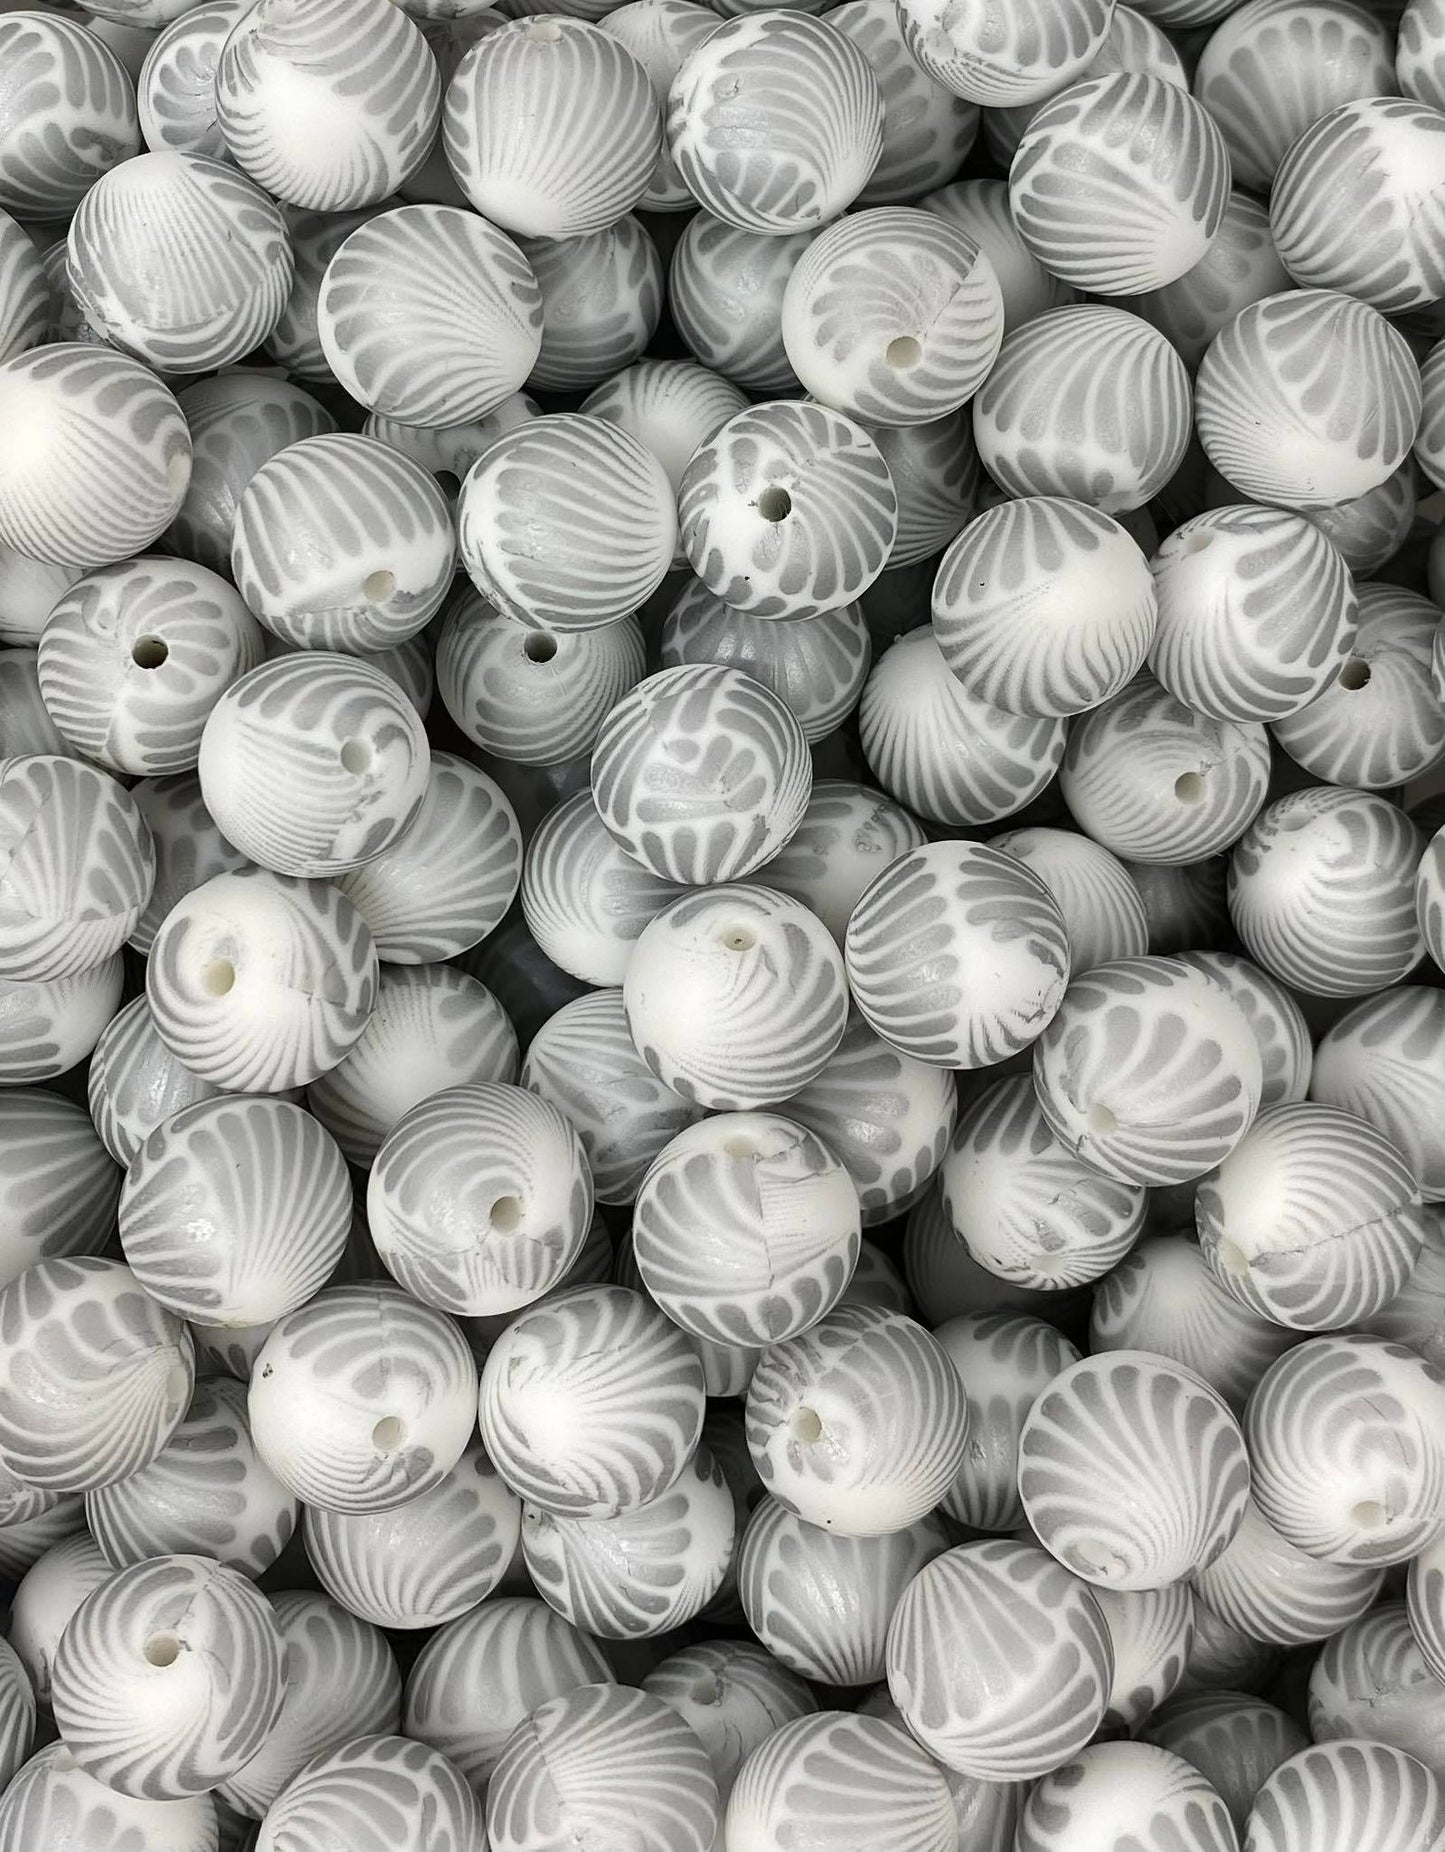 Metallic Oyster Printed 15mm Bead***Discontinued***